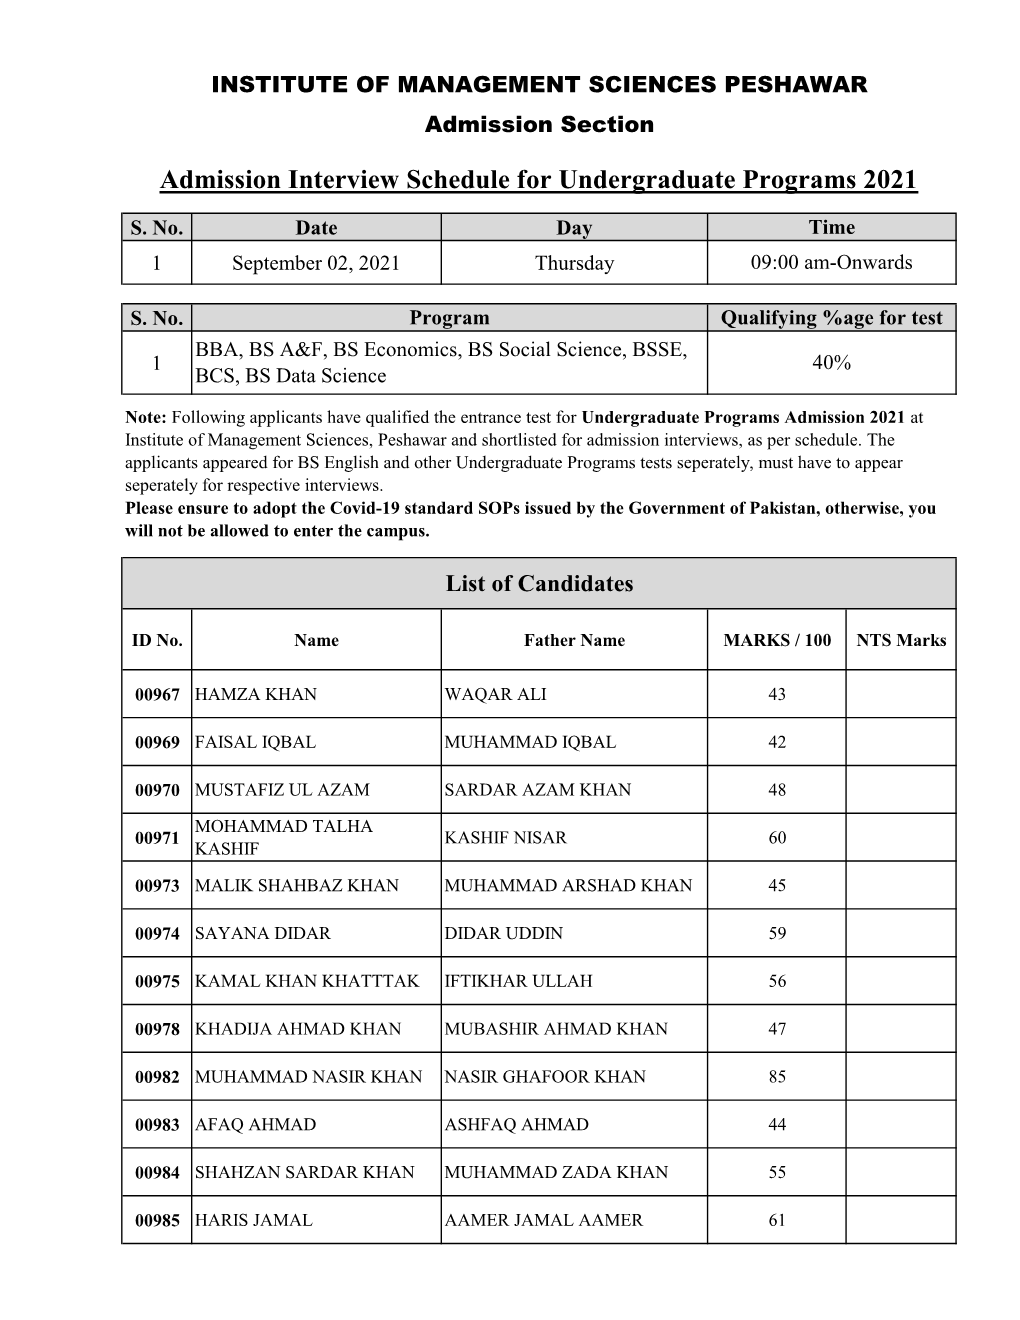 Admission Interview Schedule for Undergraduate Programs 2021